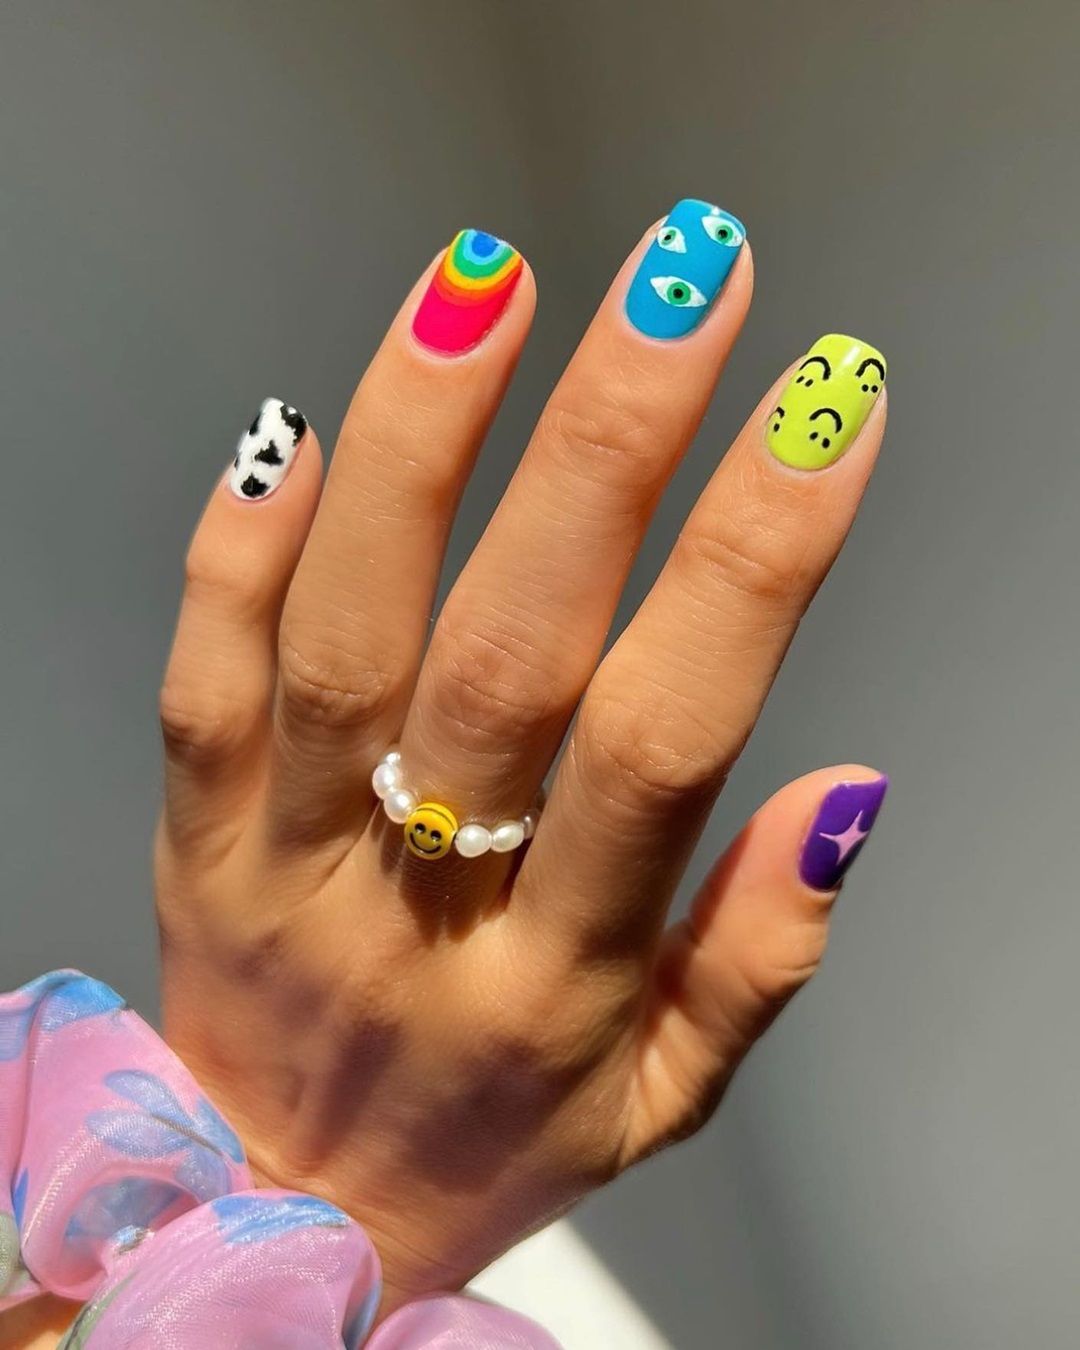 Lucky nail art is the latest TikTok trend  For a boost of positive vibes, from head to toe